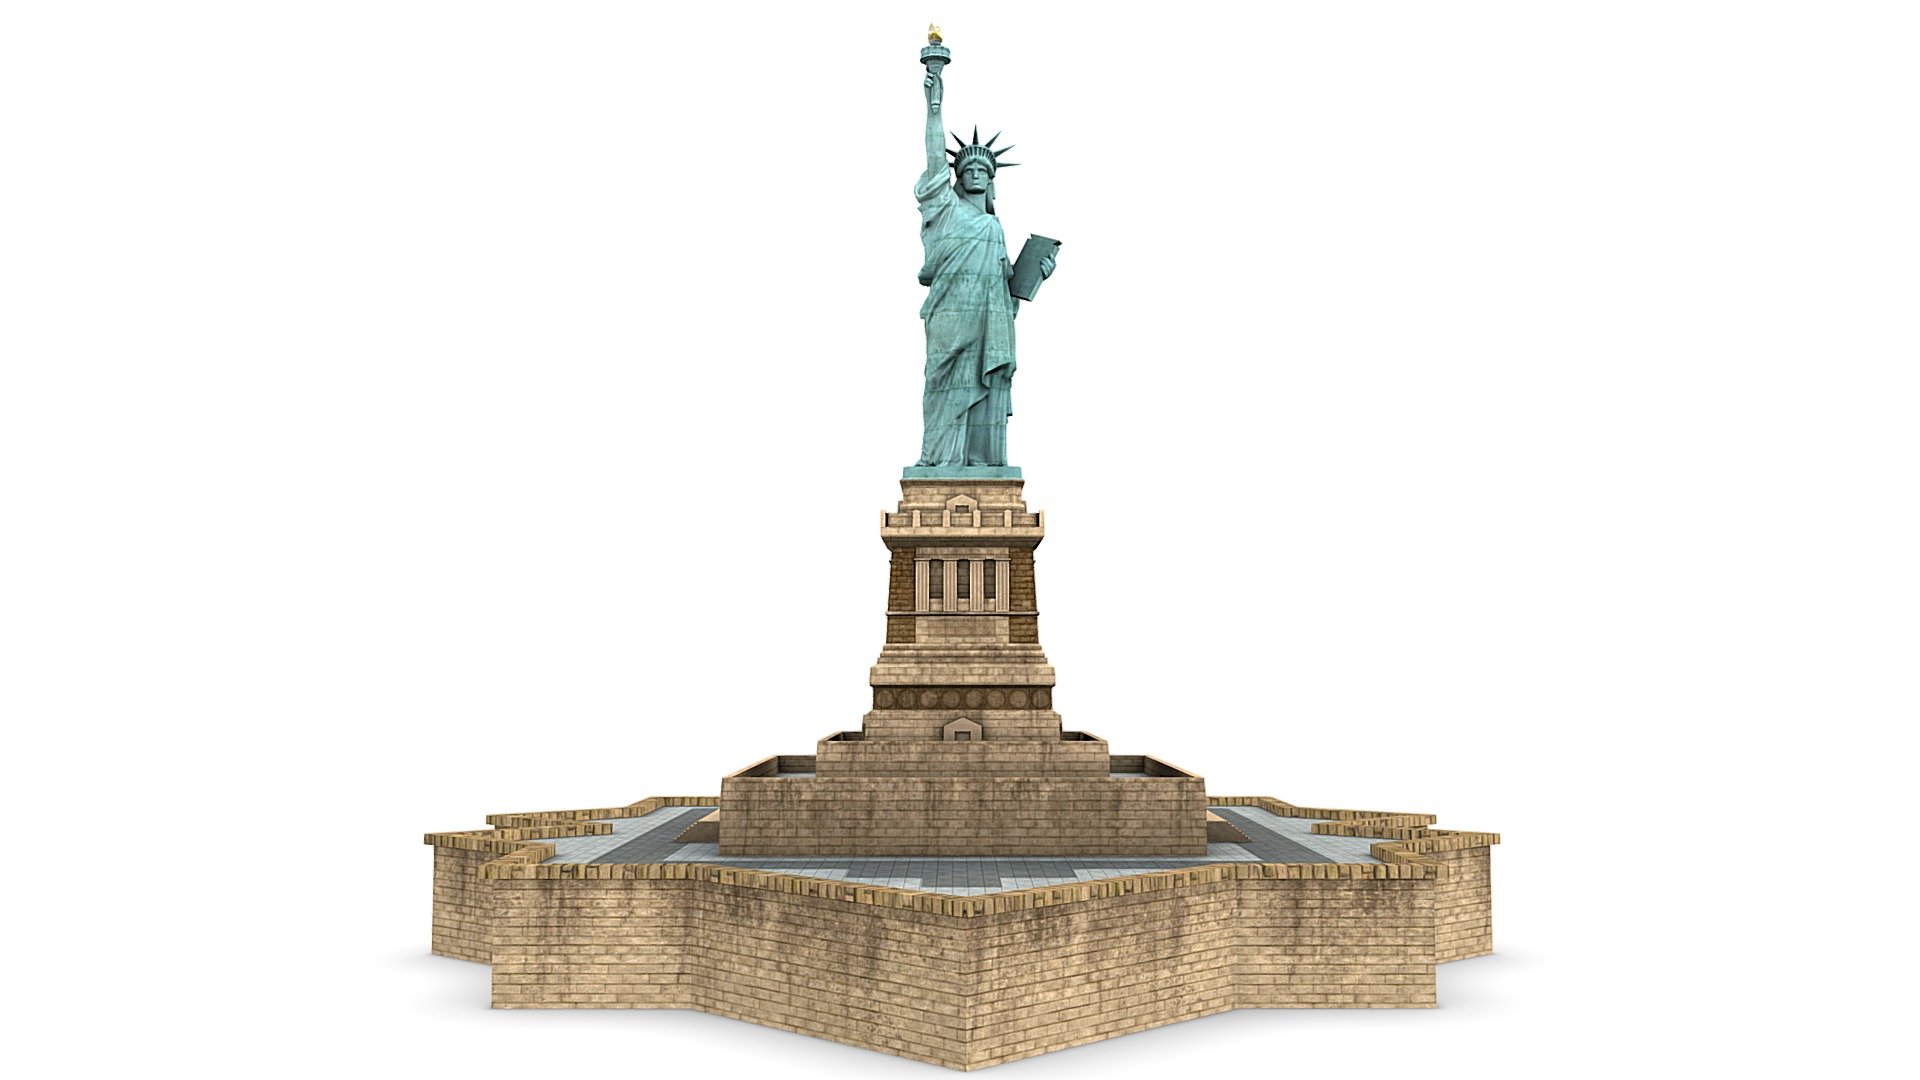 Game ready, realtime optimized Statue Of Liberty New York with high visual fidelity. Ideal as good quality background object for your NYC game scenes. Made to real world scale meters. Included files are flawless .max (native 3dsmax 2014) and .fbx, .obj, .3ds. Clean and smooth triangle based geometry with 9302 tris, no N-gons, no flipped or missing faces, no artifacts. Mesh has a 100% human-controlled triangulation and is ready for your game engine. 1 x unwrapped non-overlapping UV layout. There are no overlapped UVs per UV island and there are no missing textures, all are fully included, all texture sizes are power of 2, and are PBR specular workflow ready, created in native 4096 x 4096 px 3d model